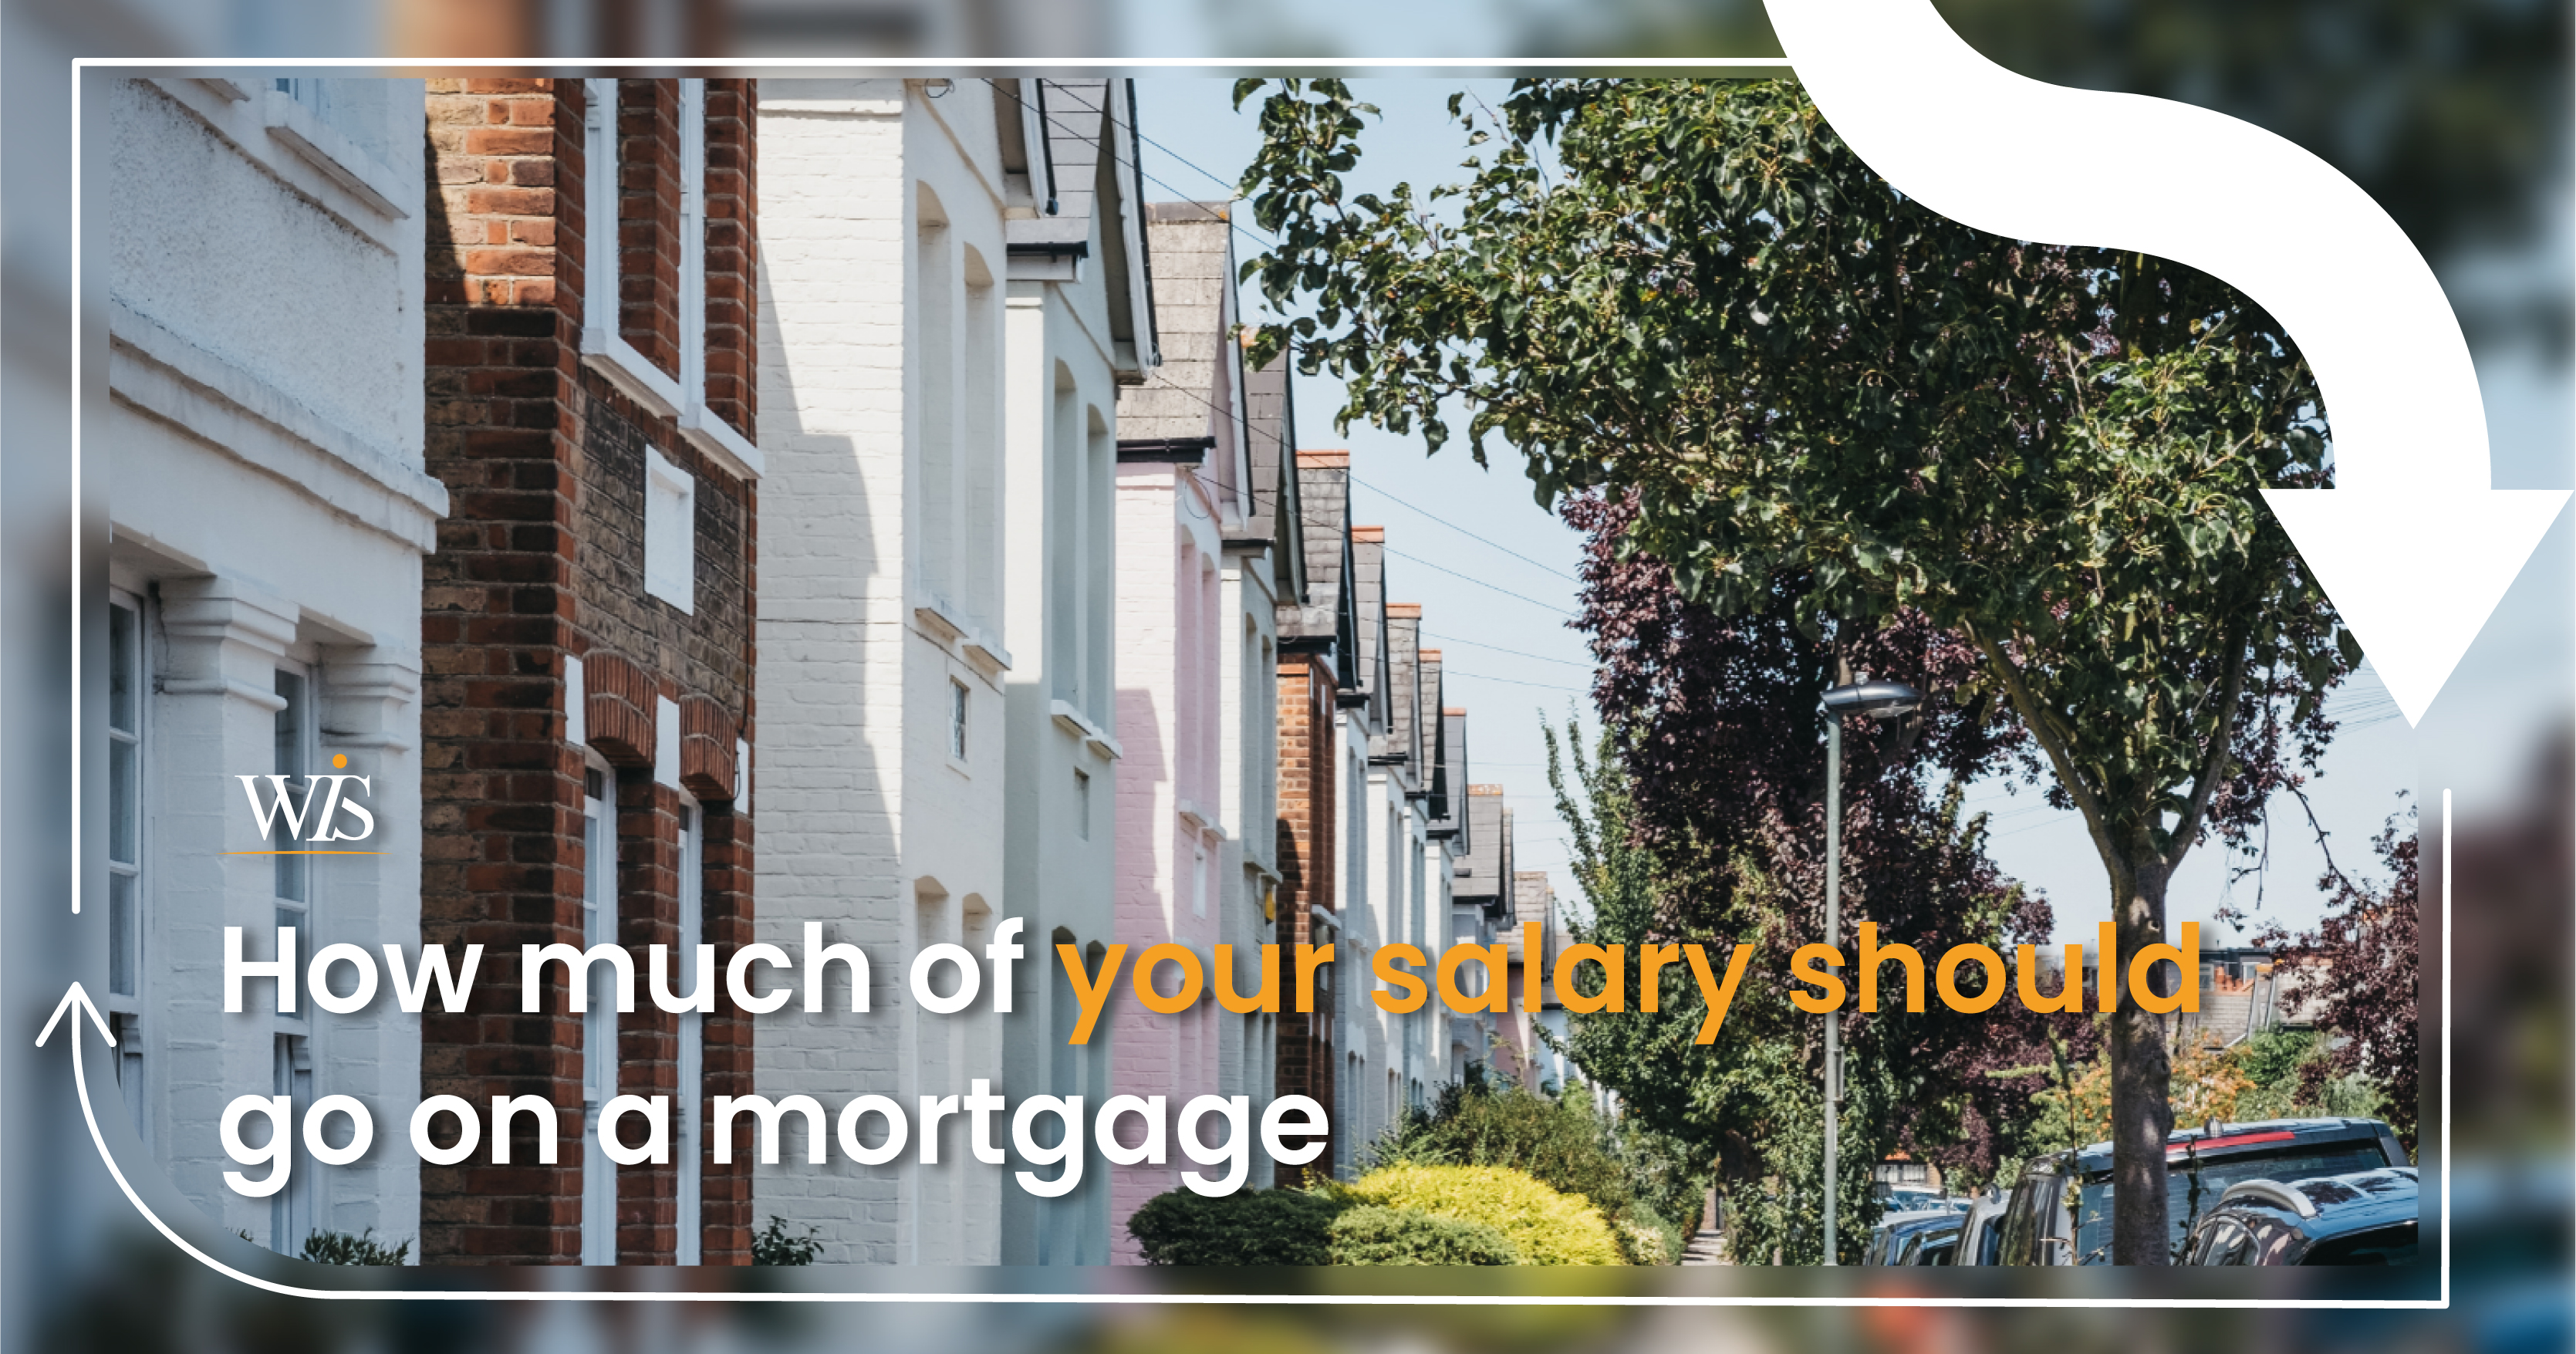 How much of your salary should go on mortgage payments? image